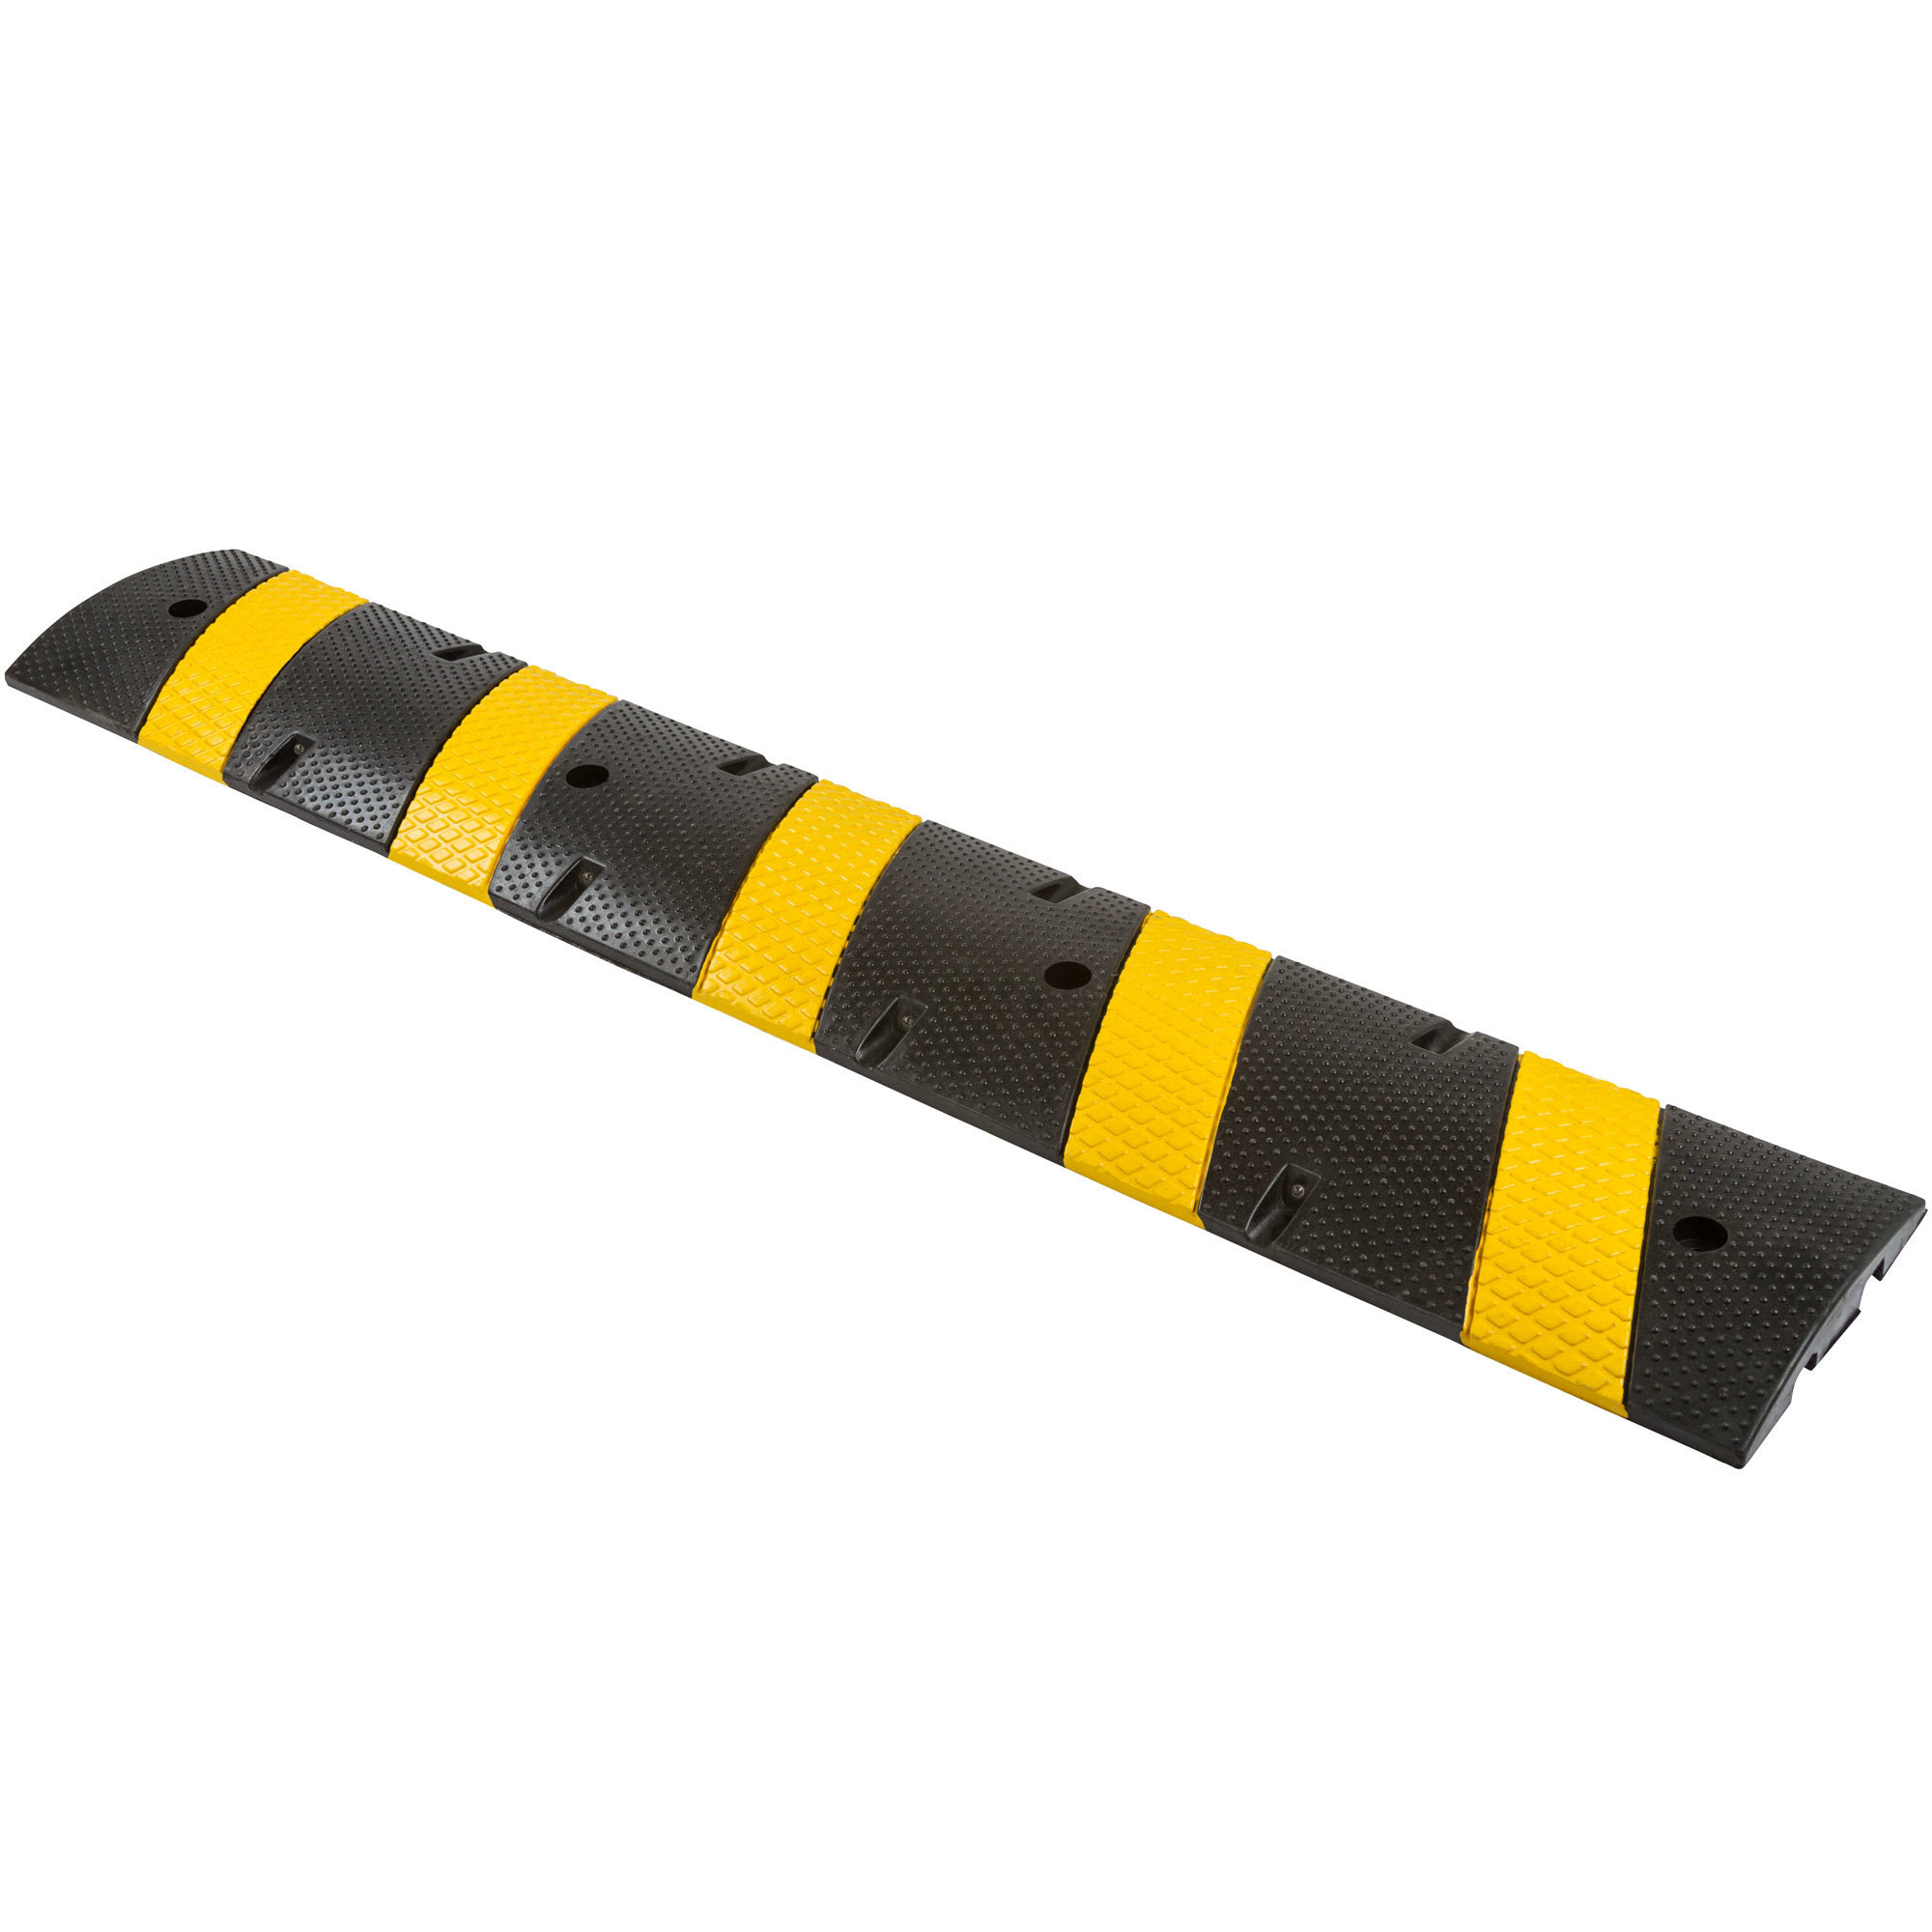 Guardian, 6ft.Lx12Inch W Guardian Modular Speed Bump-Middle, Length 72 in, Height 2 in, Material Rubber, Model DH-SP-26M